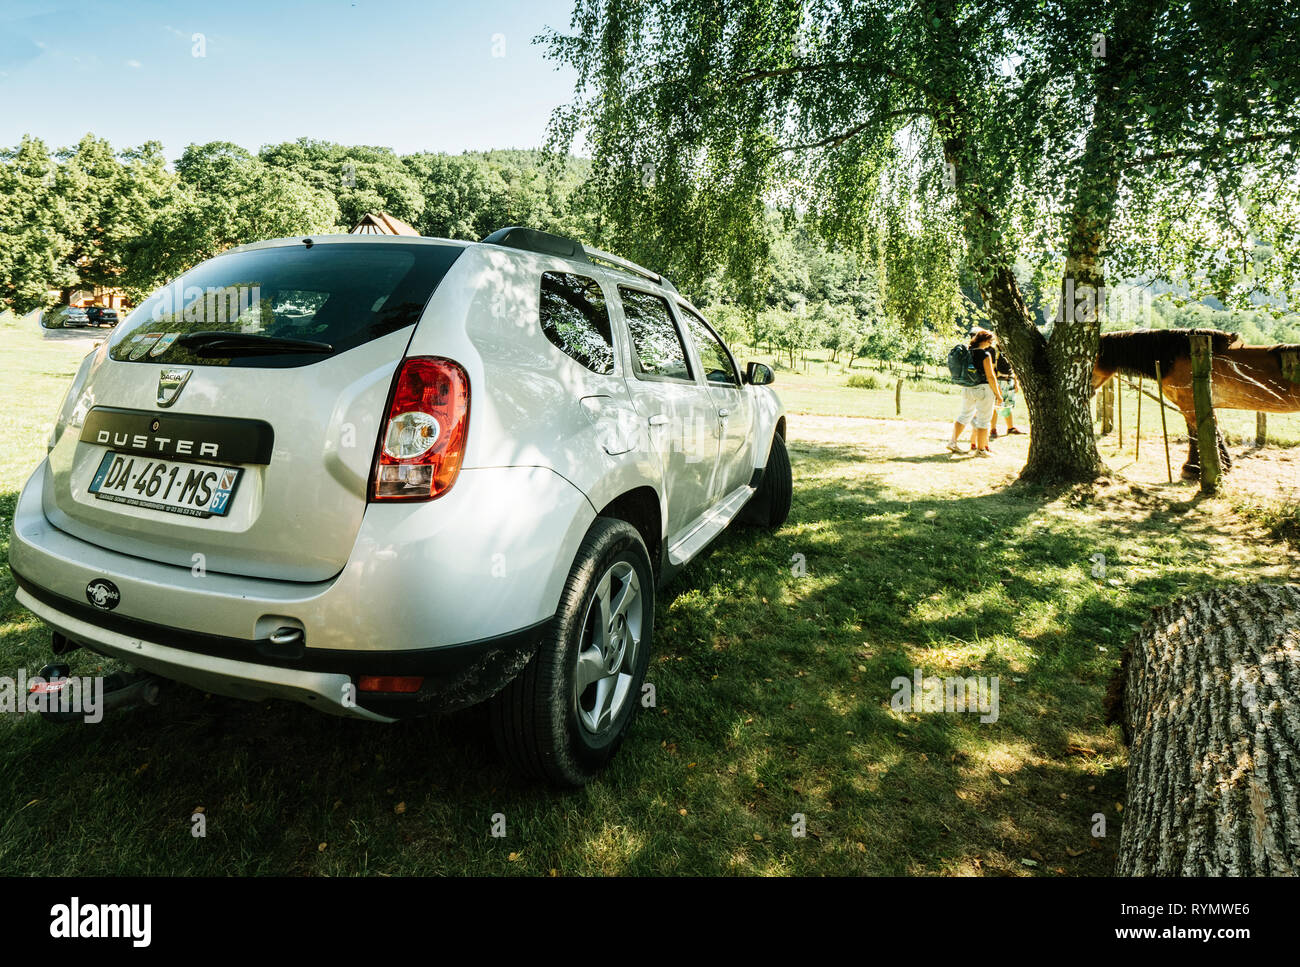 Dacia Duster High Resolution Stock Photography and Images - Alamy